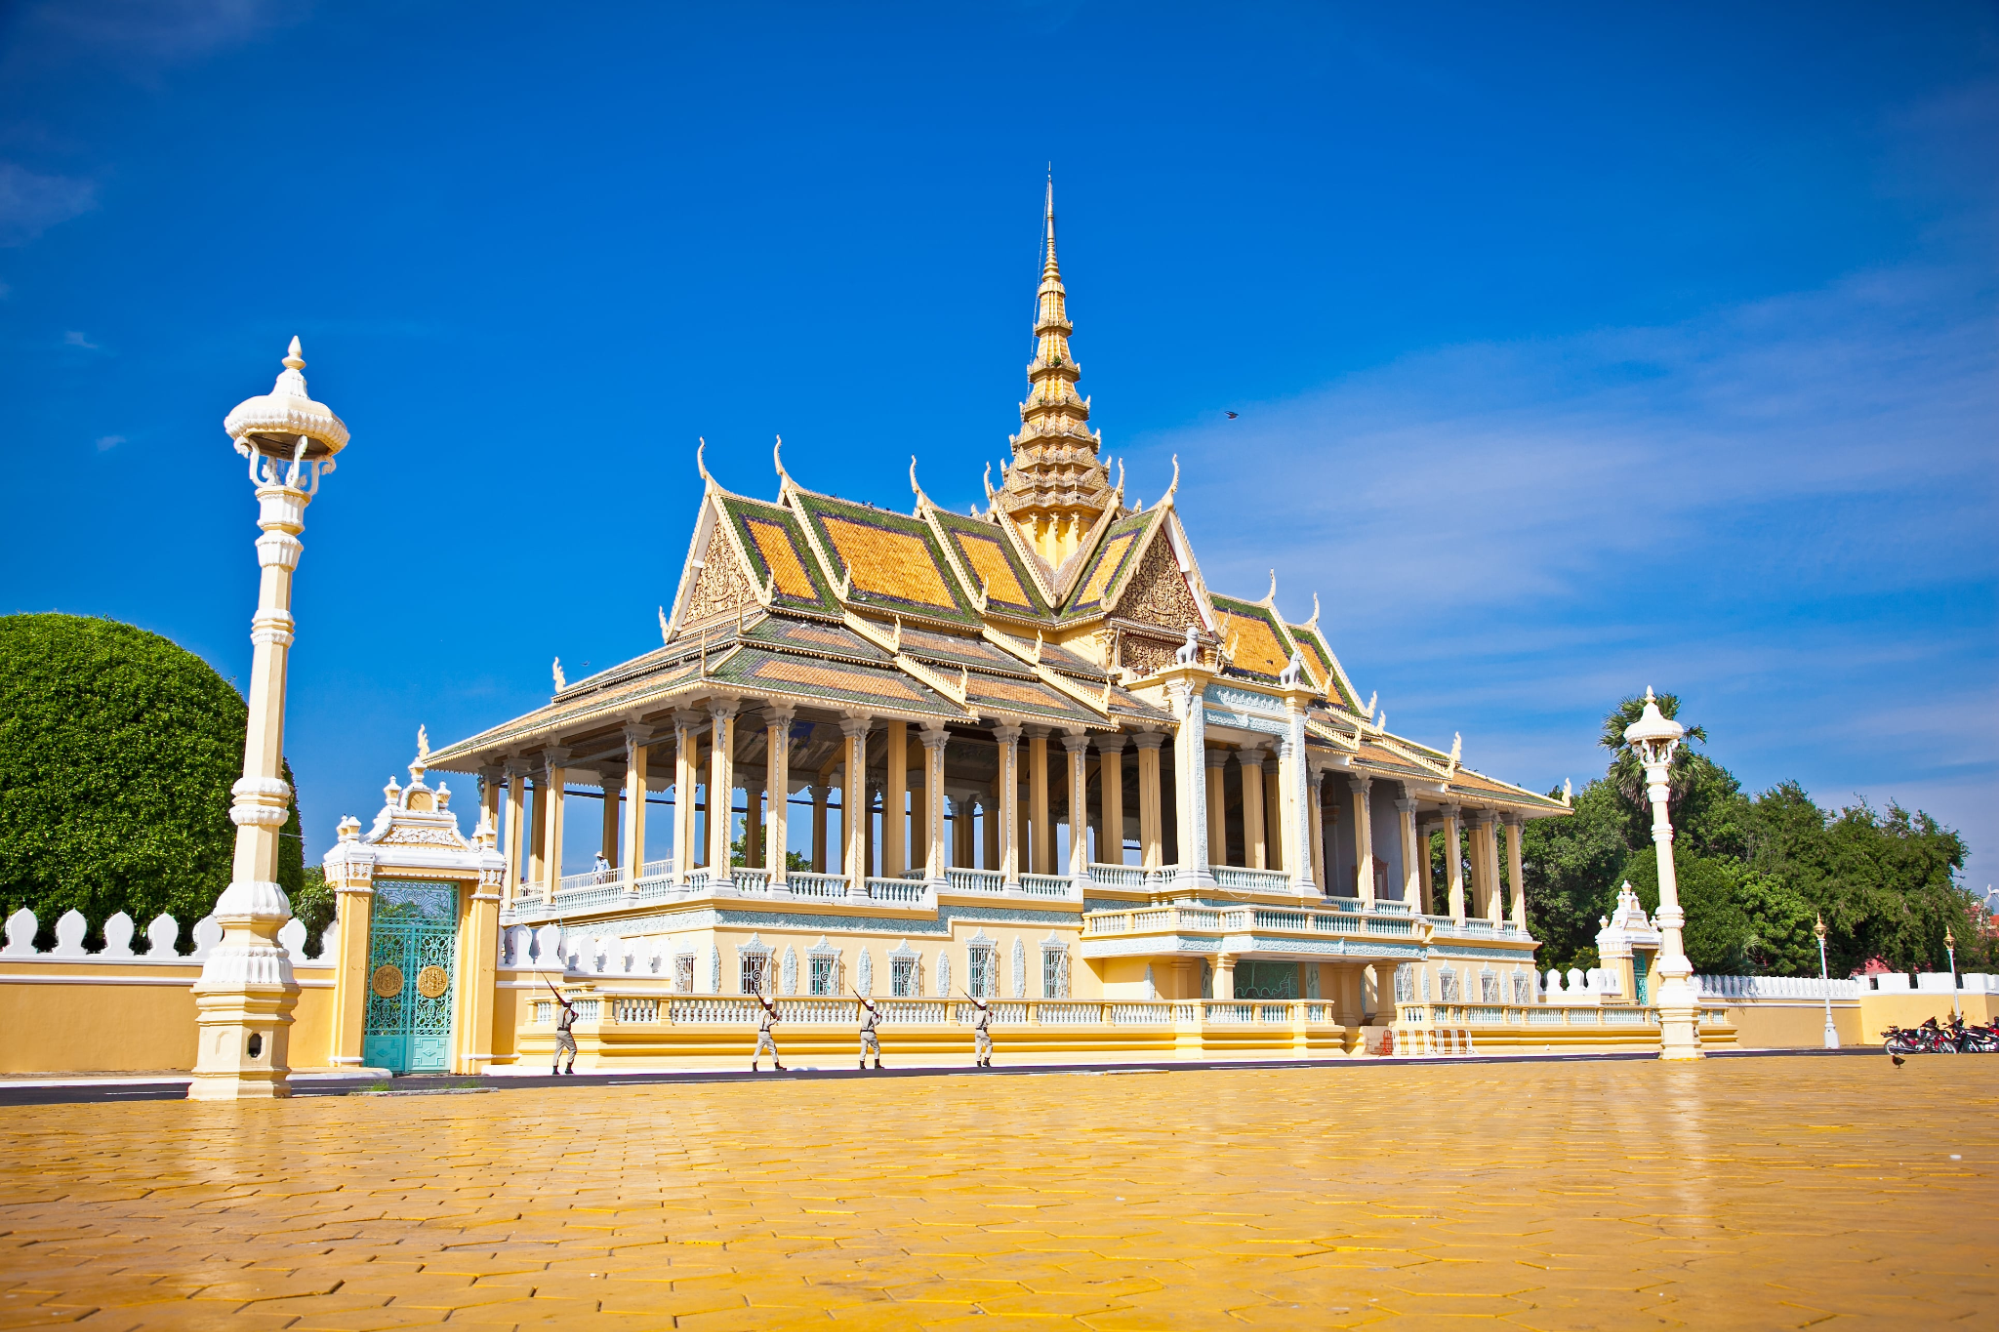 The exterior of the Royal Palace in Phnom Penh